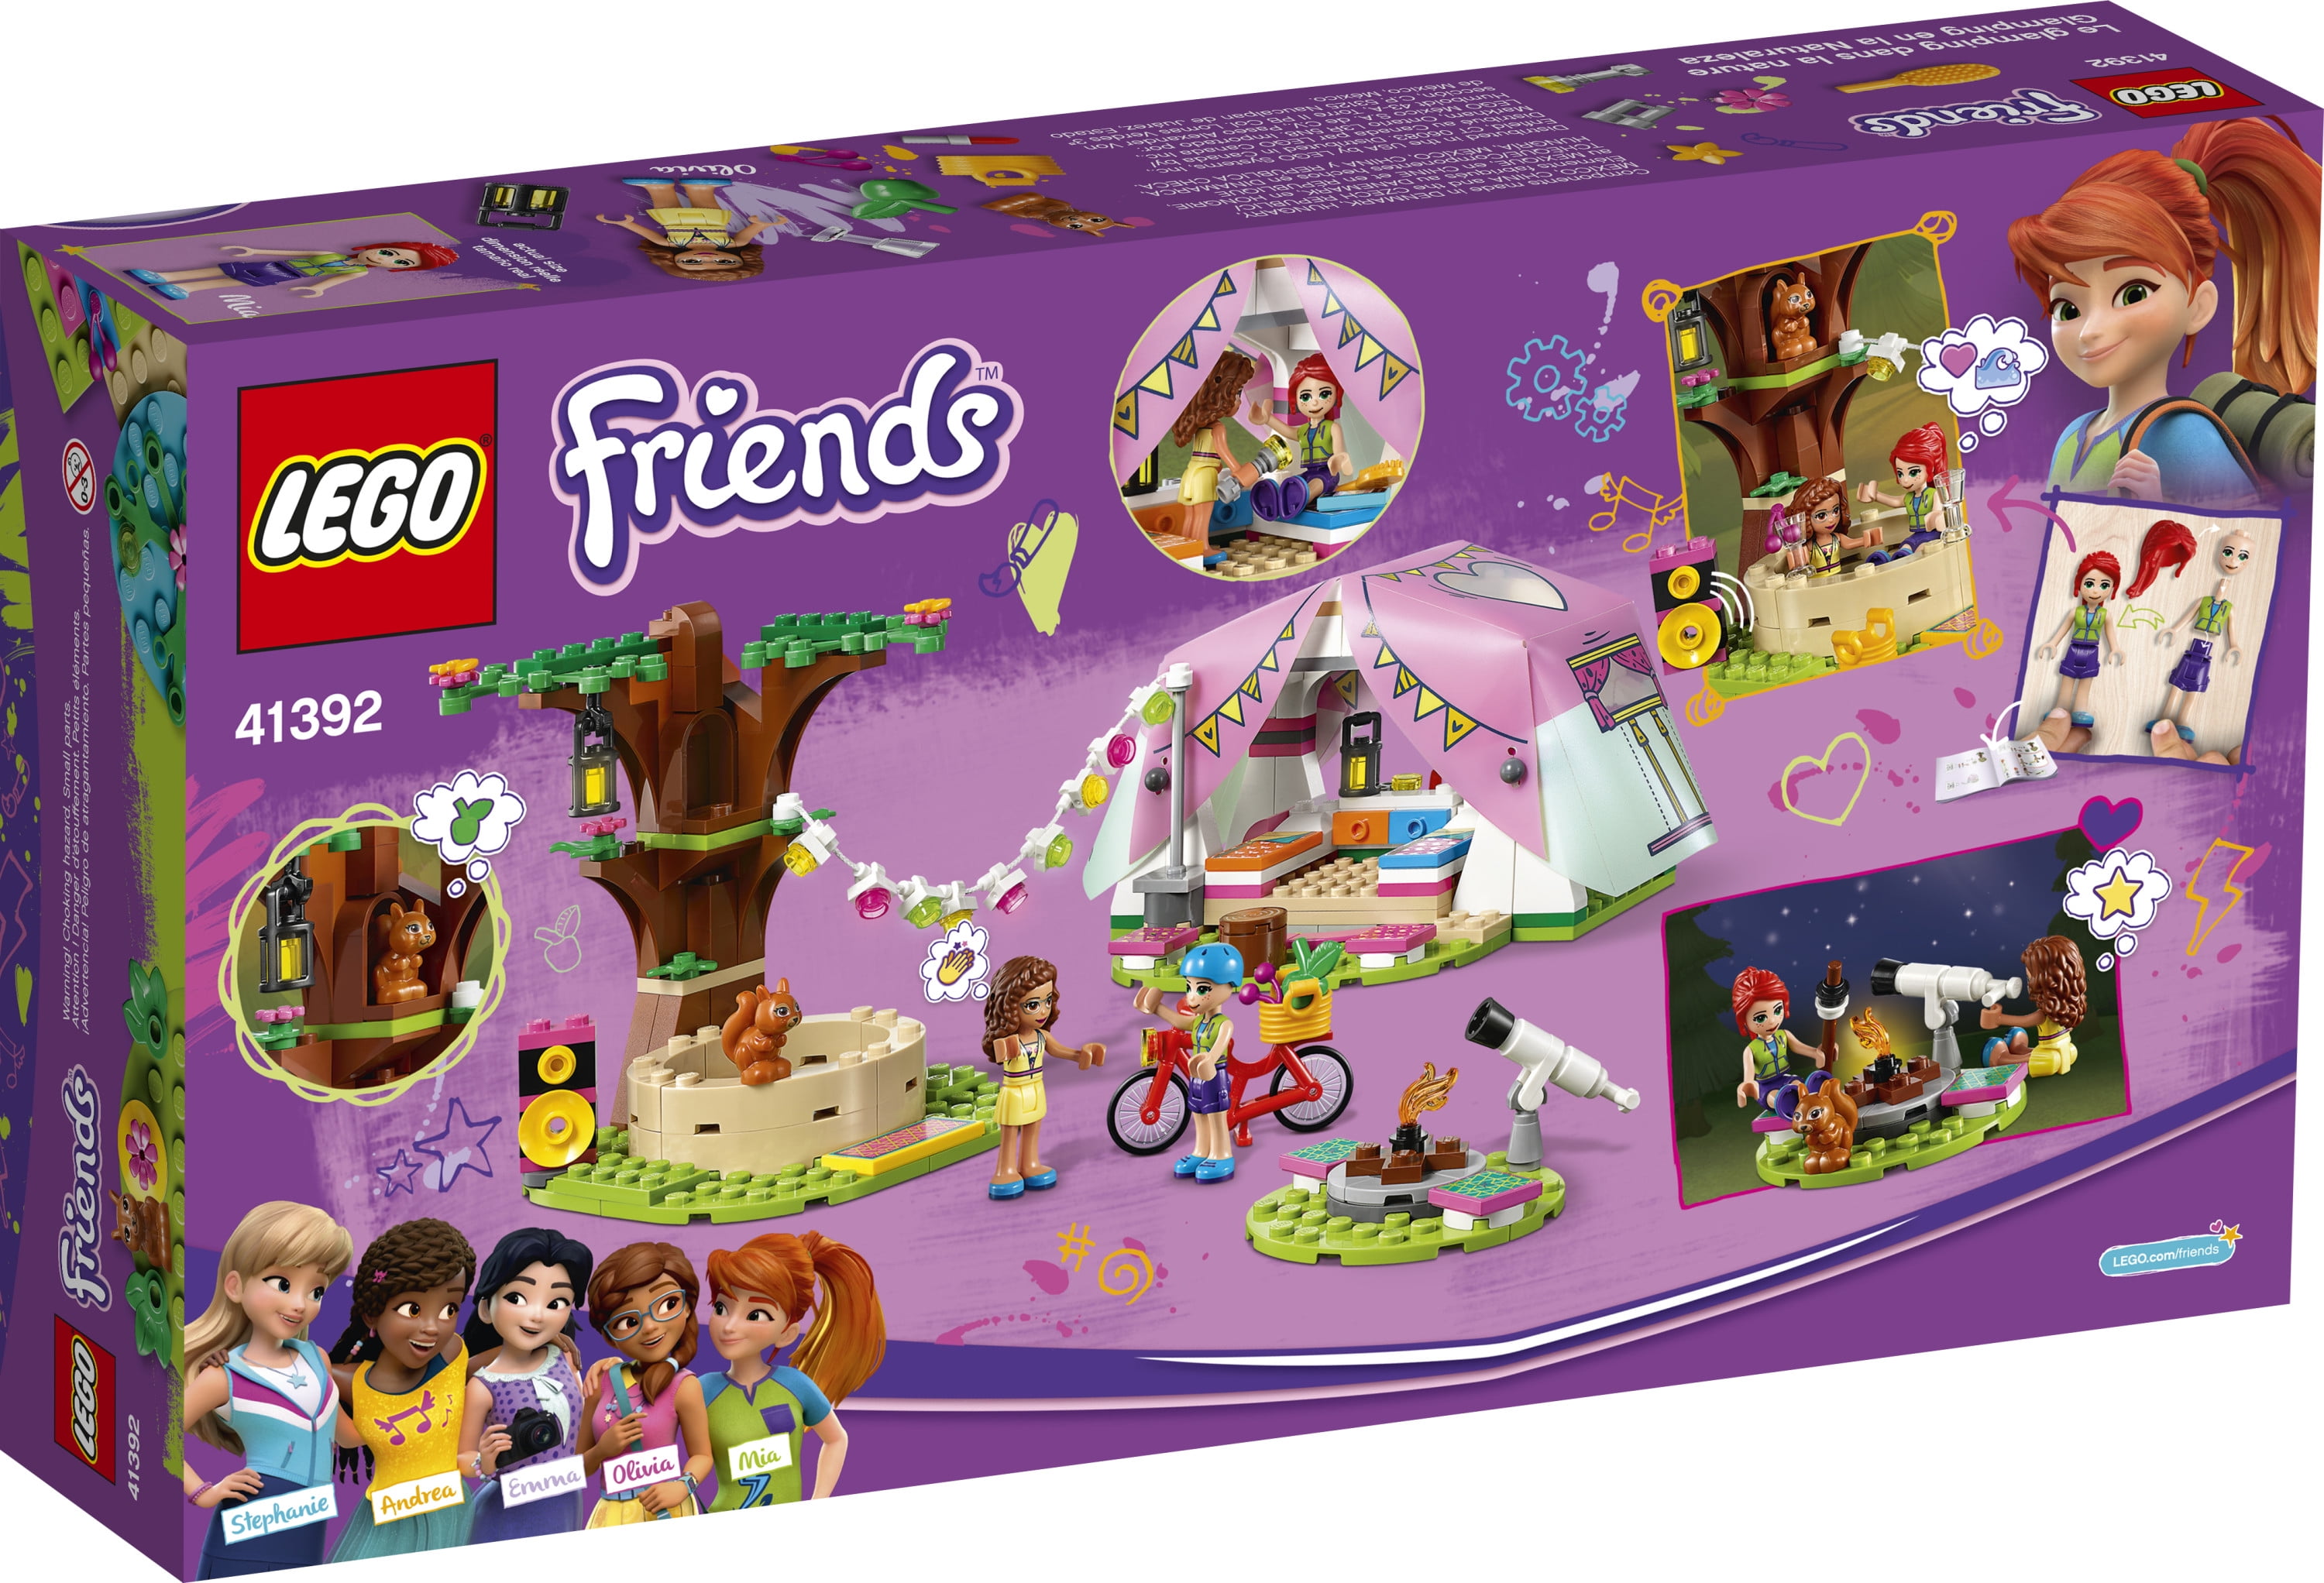 LEGO Friends Nature Glamping 41392 Toy Camping Building Kit Pieces) - Walmart.com